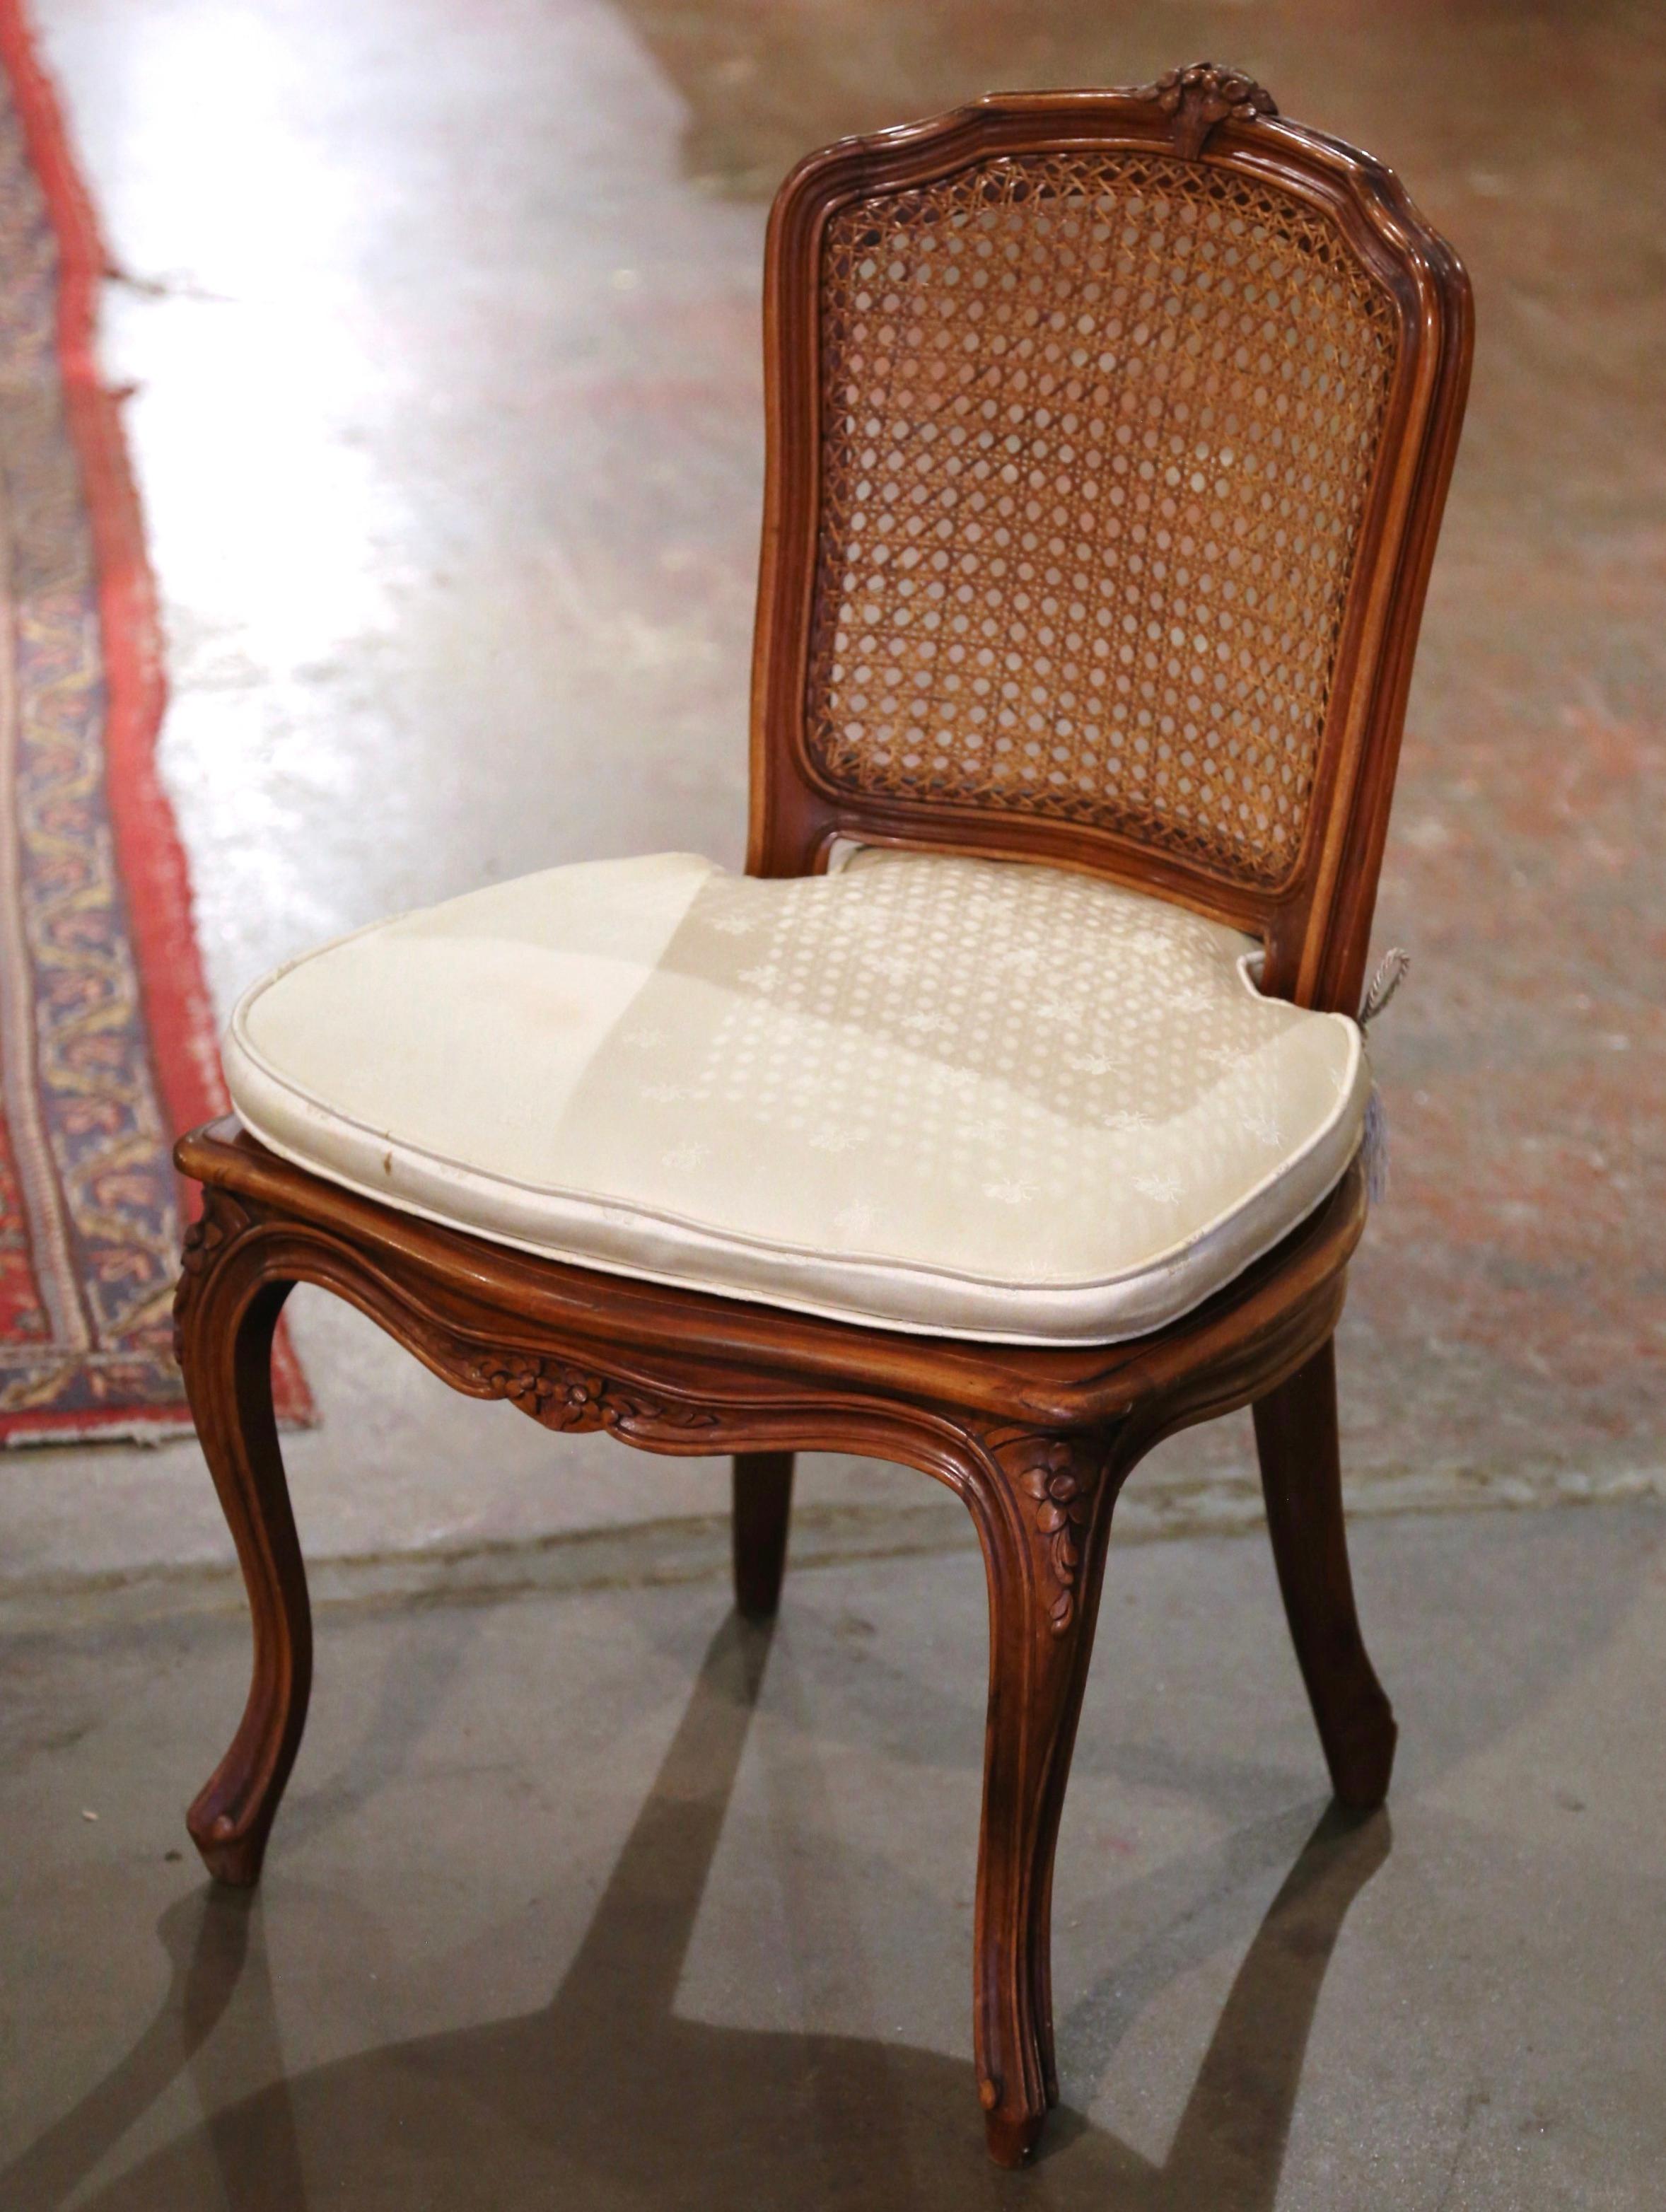 Add charm to a family friendly living room or nursery with this elegant low chair. Crafted in France circa 1970 and nicely carved, the antique chair stands on cabriole legs decorated with floral medallions at the shoulder, over a scalloped apron